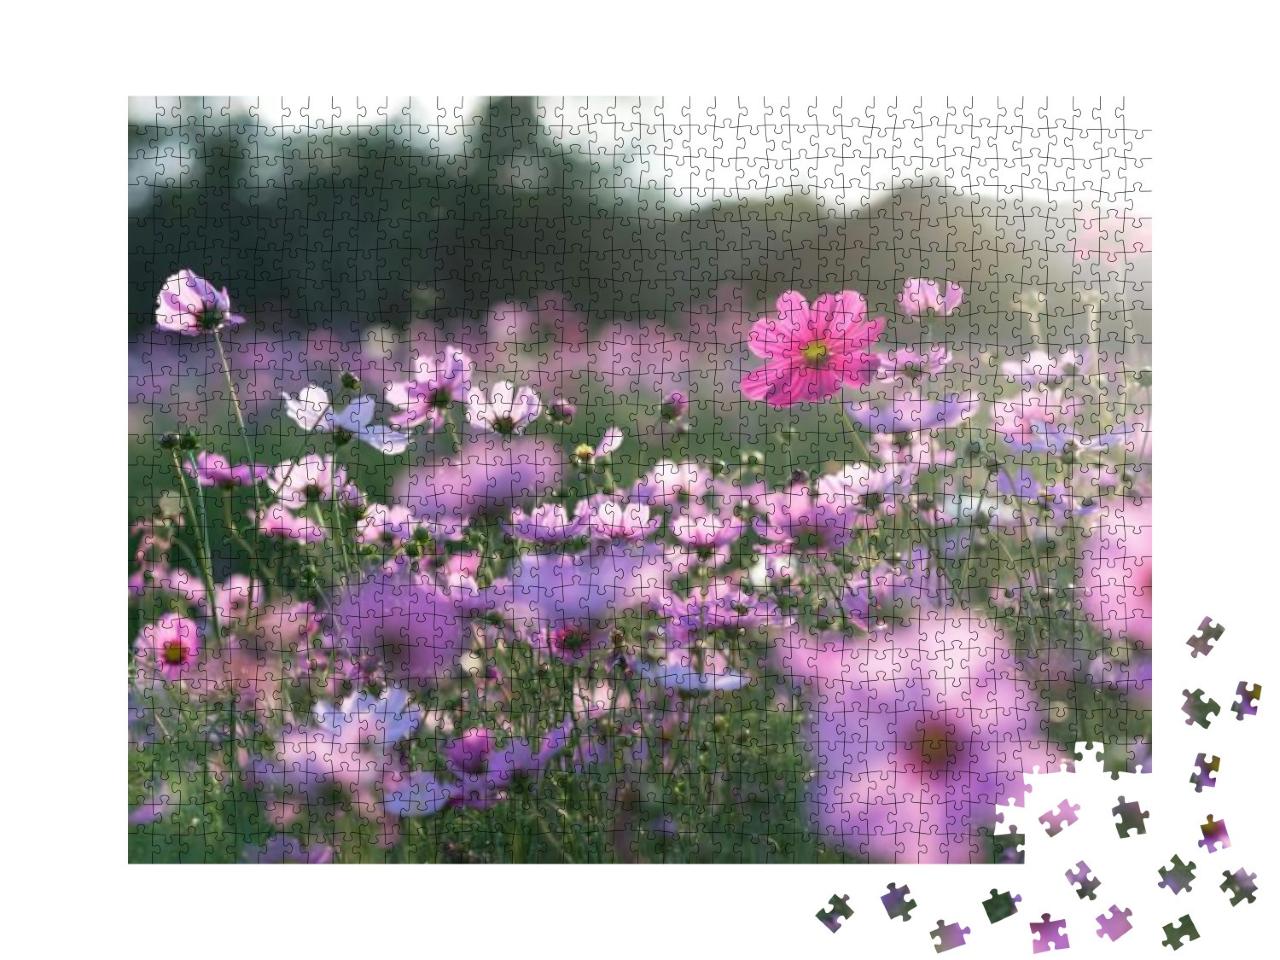 Field of Cosmos Flower... Jigsaw Puzzle with 1000 pieces